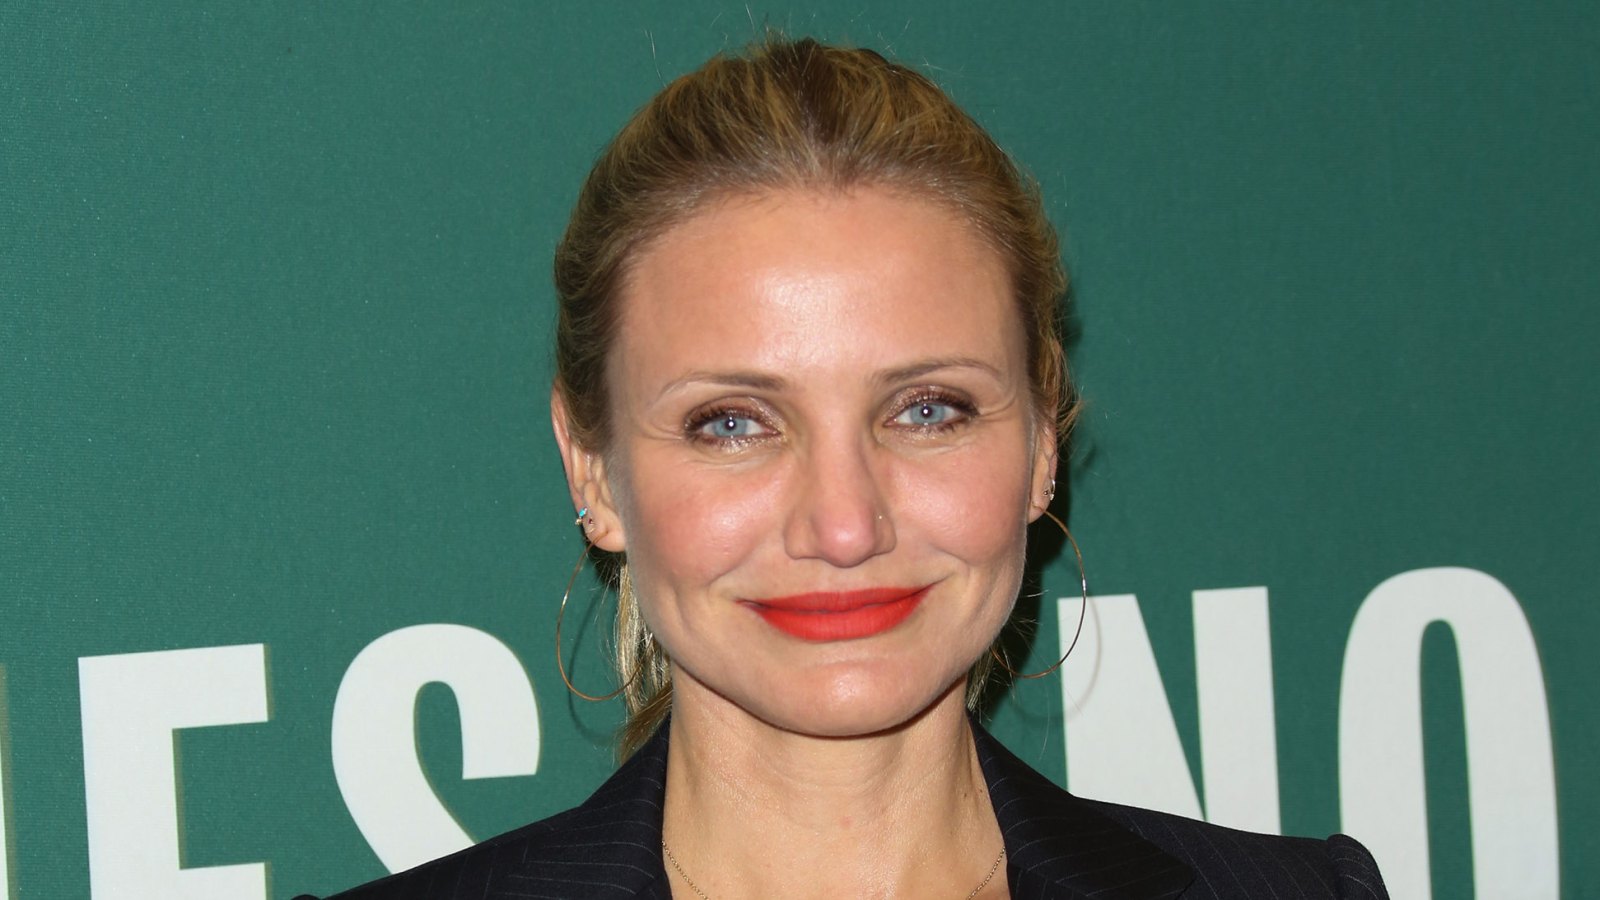 Cameron Diaz Signs Her New Book "The Longevity Book: The Science Of Aging, The Biology Of Strength And The Privilege Of Time"